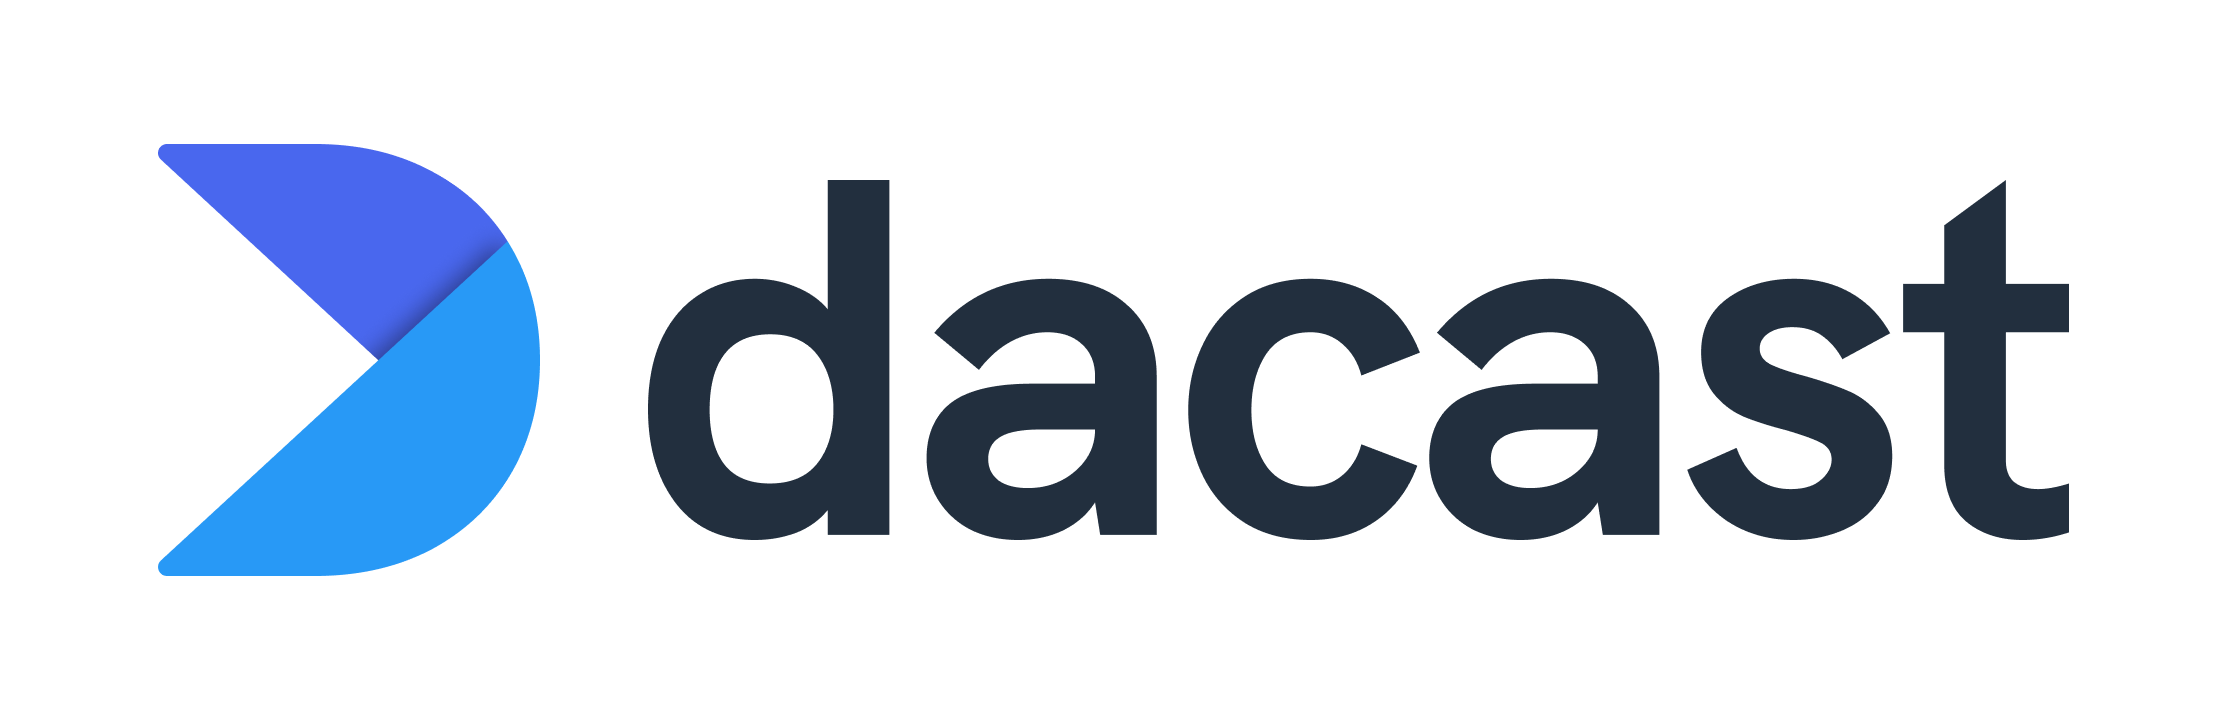 Dacast_primary_logo_720.png